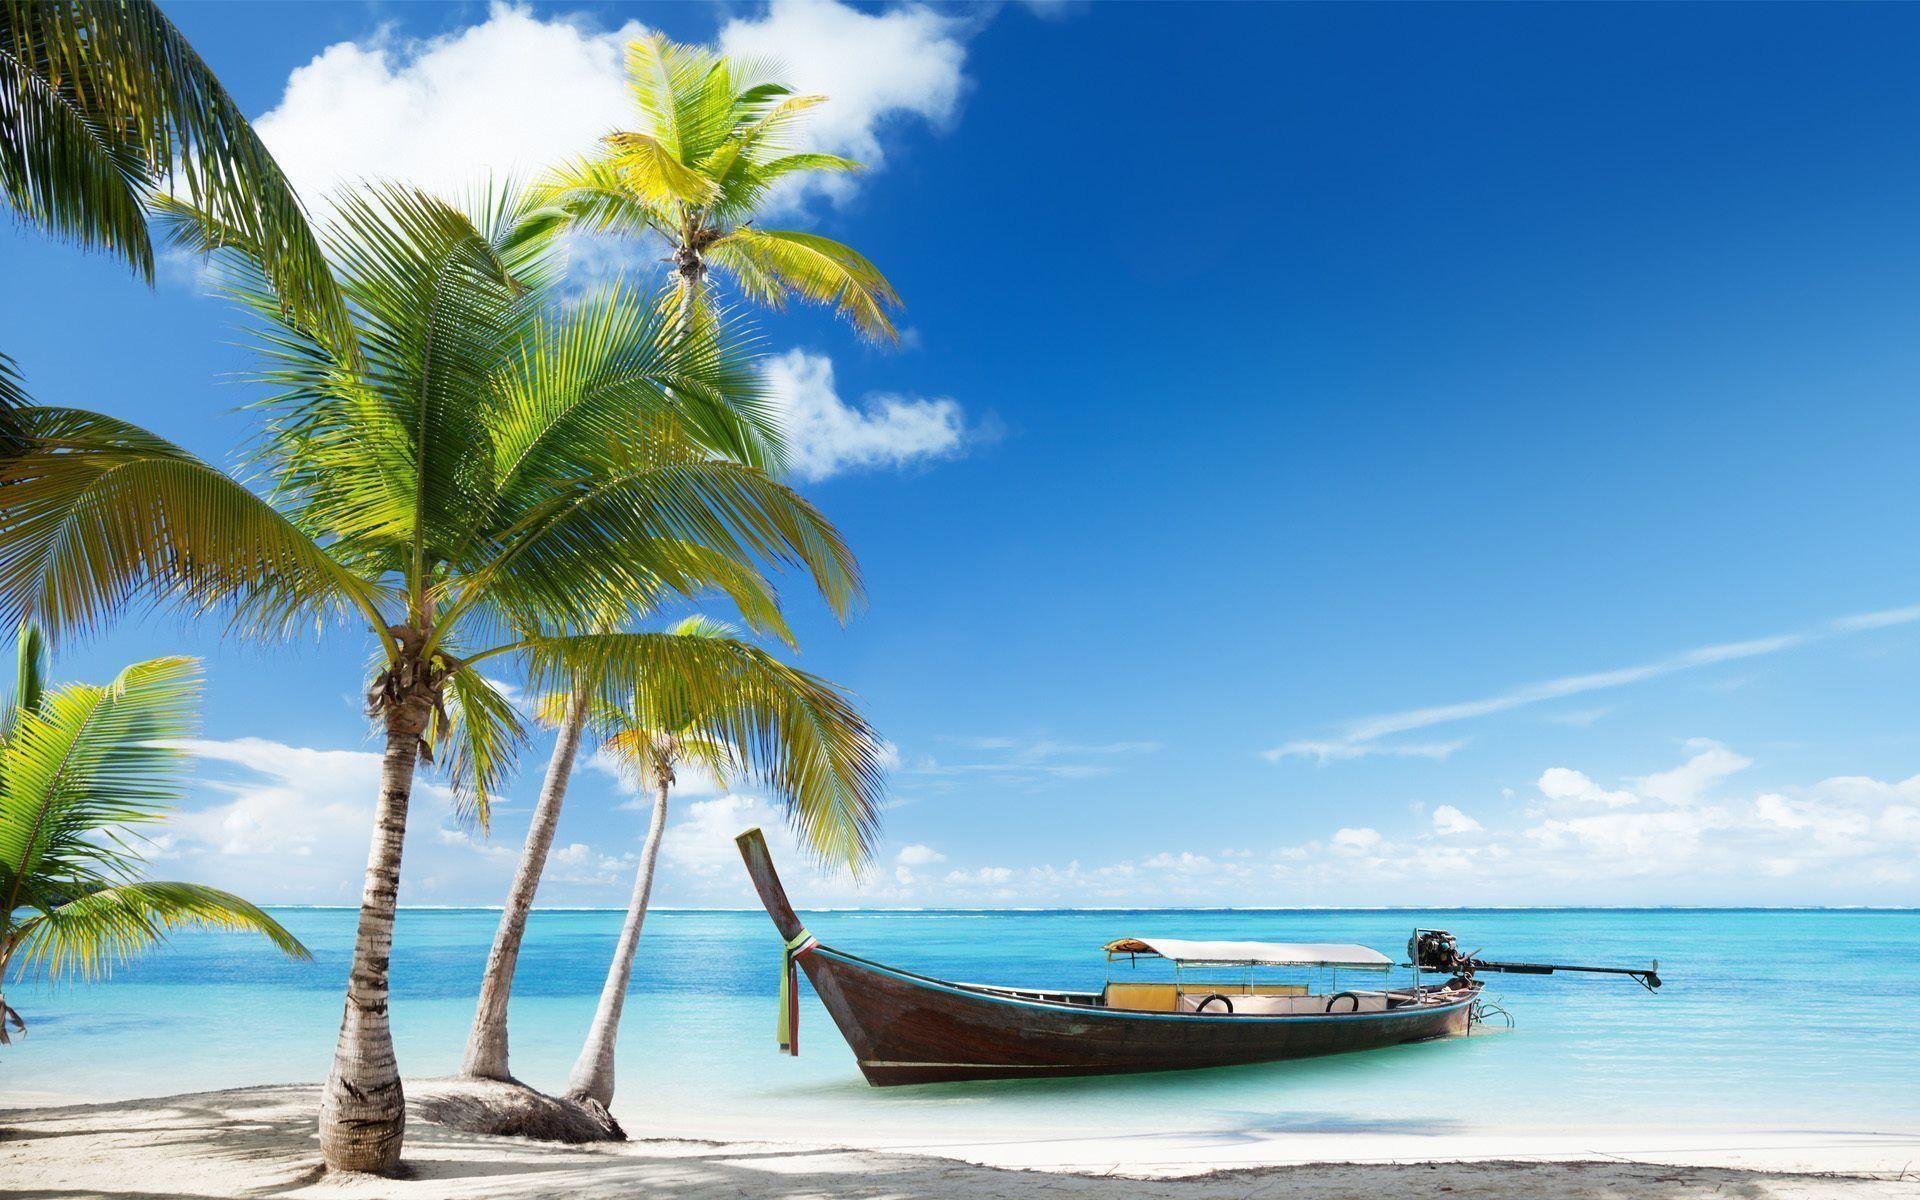 Tropical Island Picture Wallpaper 16876 High Resolution. download